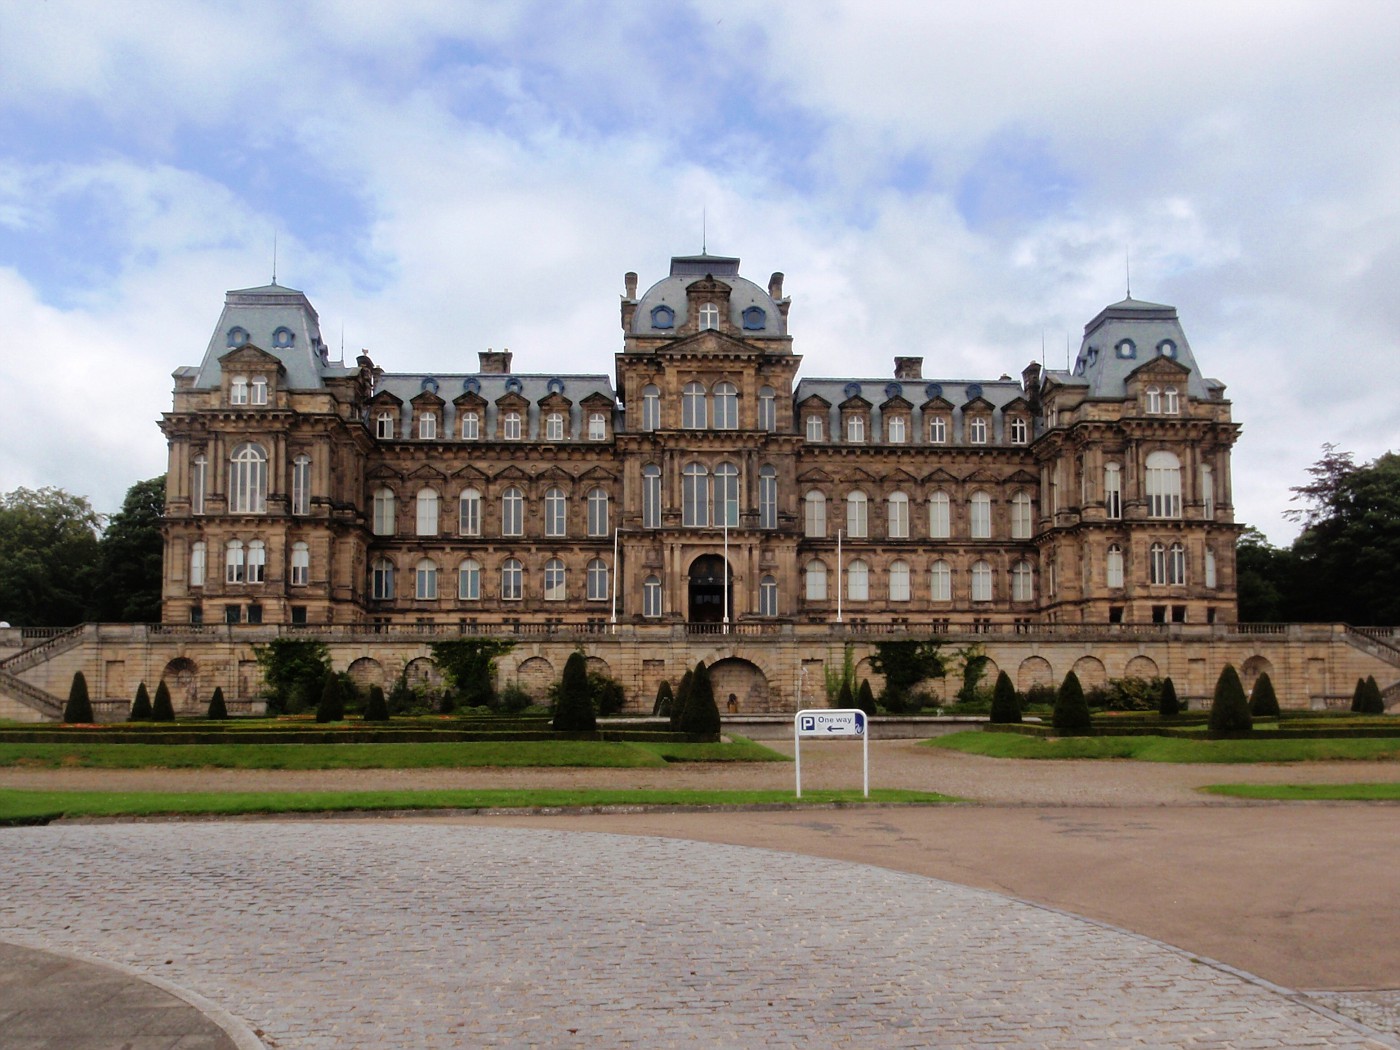 The Bowes Museum of Barnard Castle